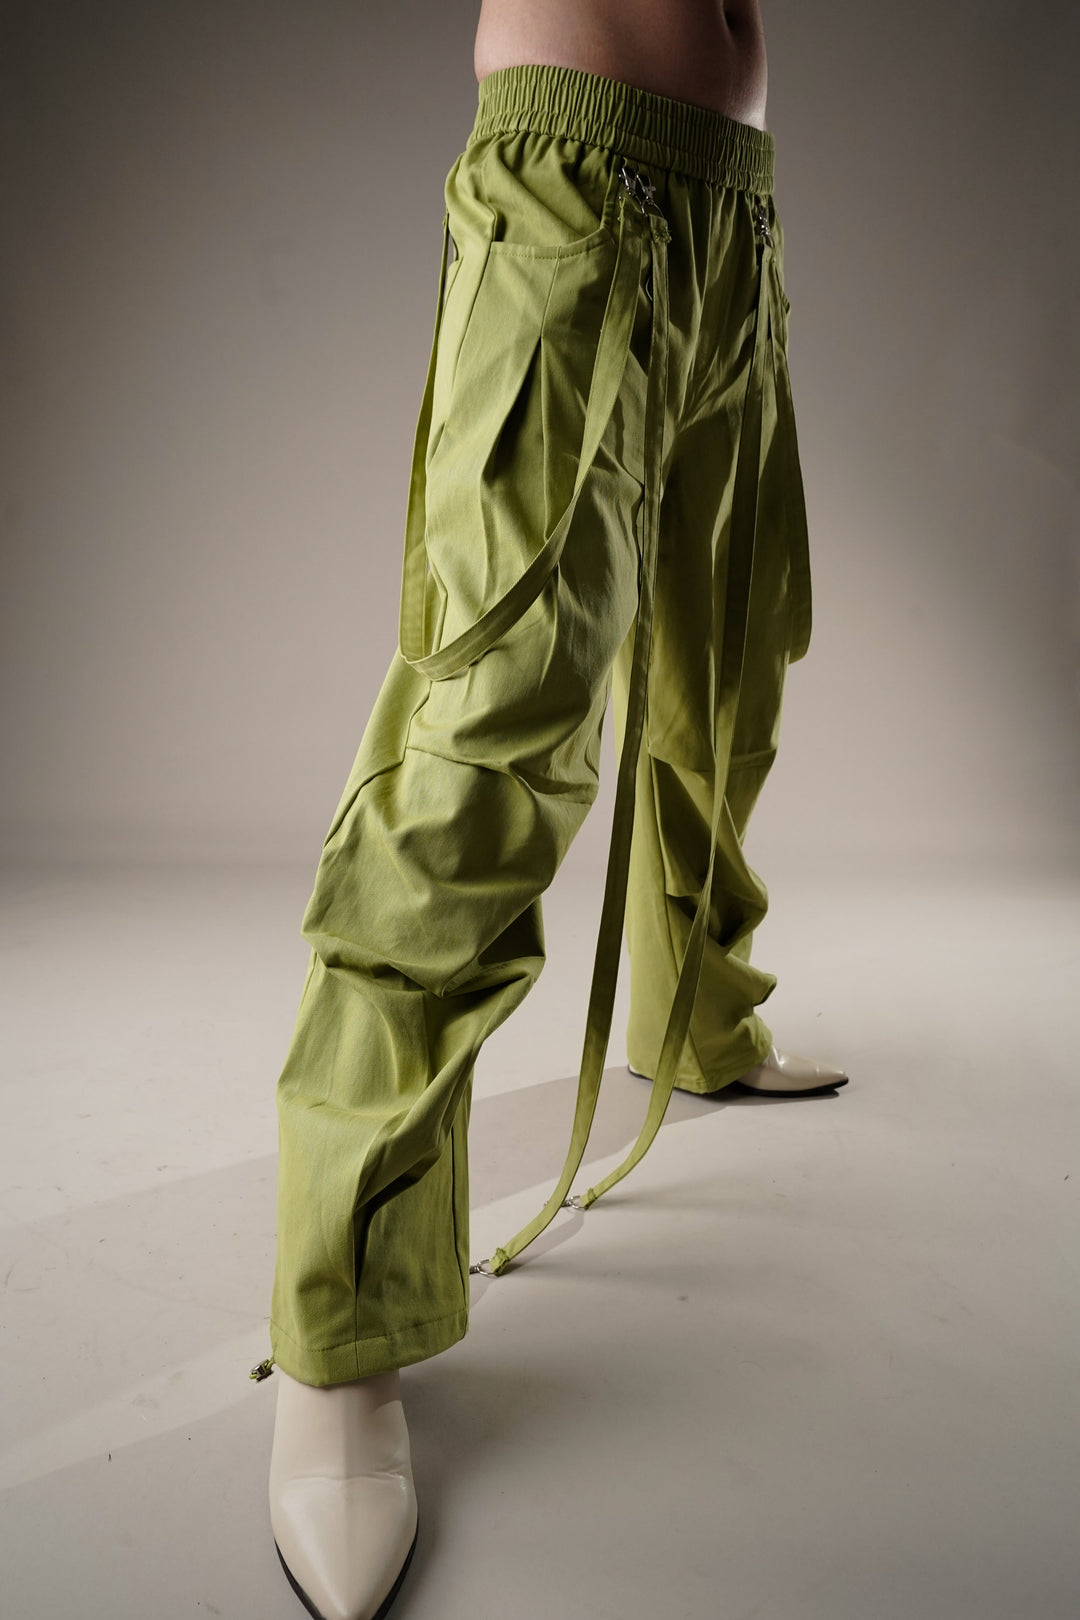 Lime color cargo pants for vacation wear